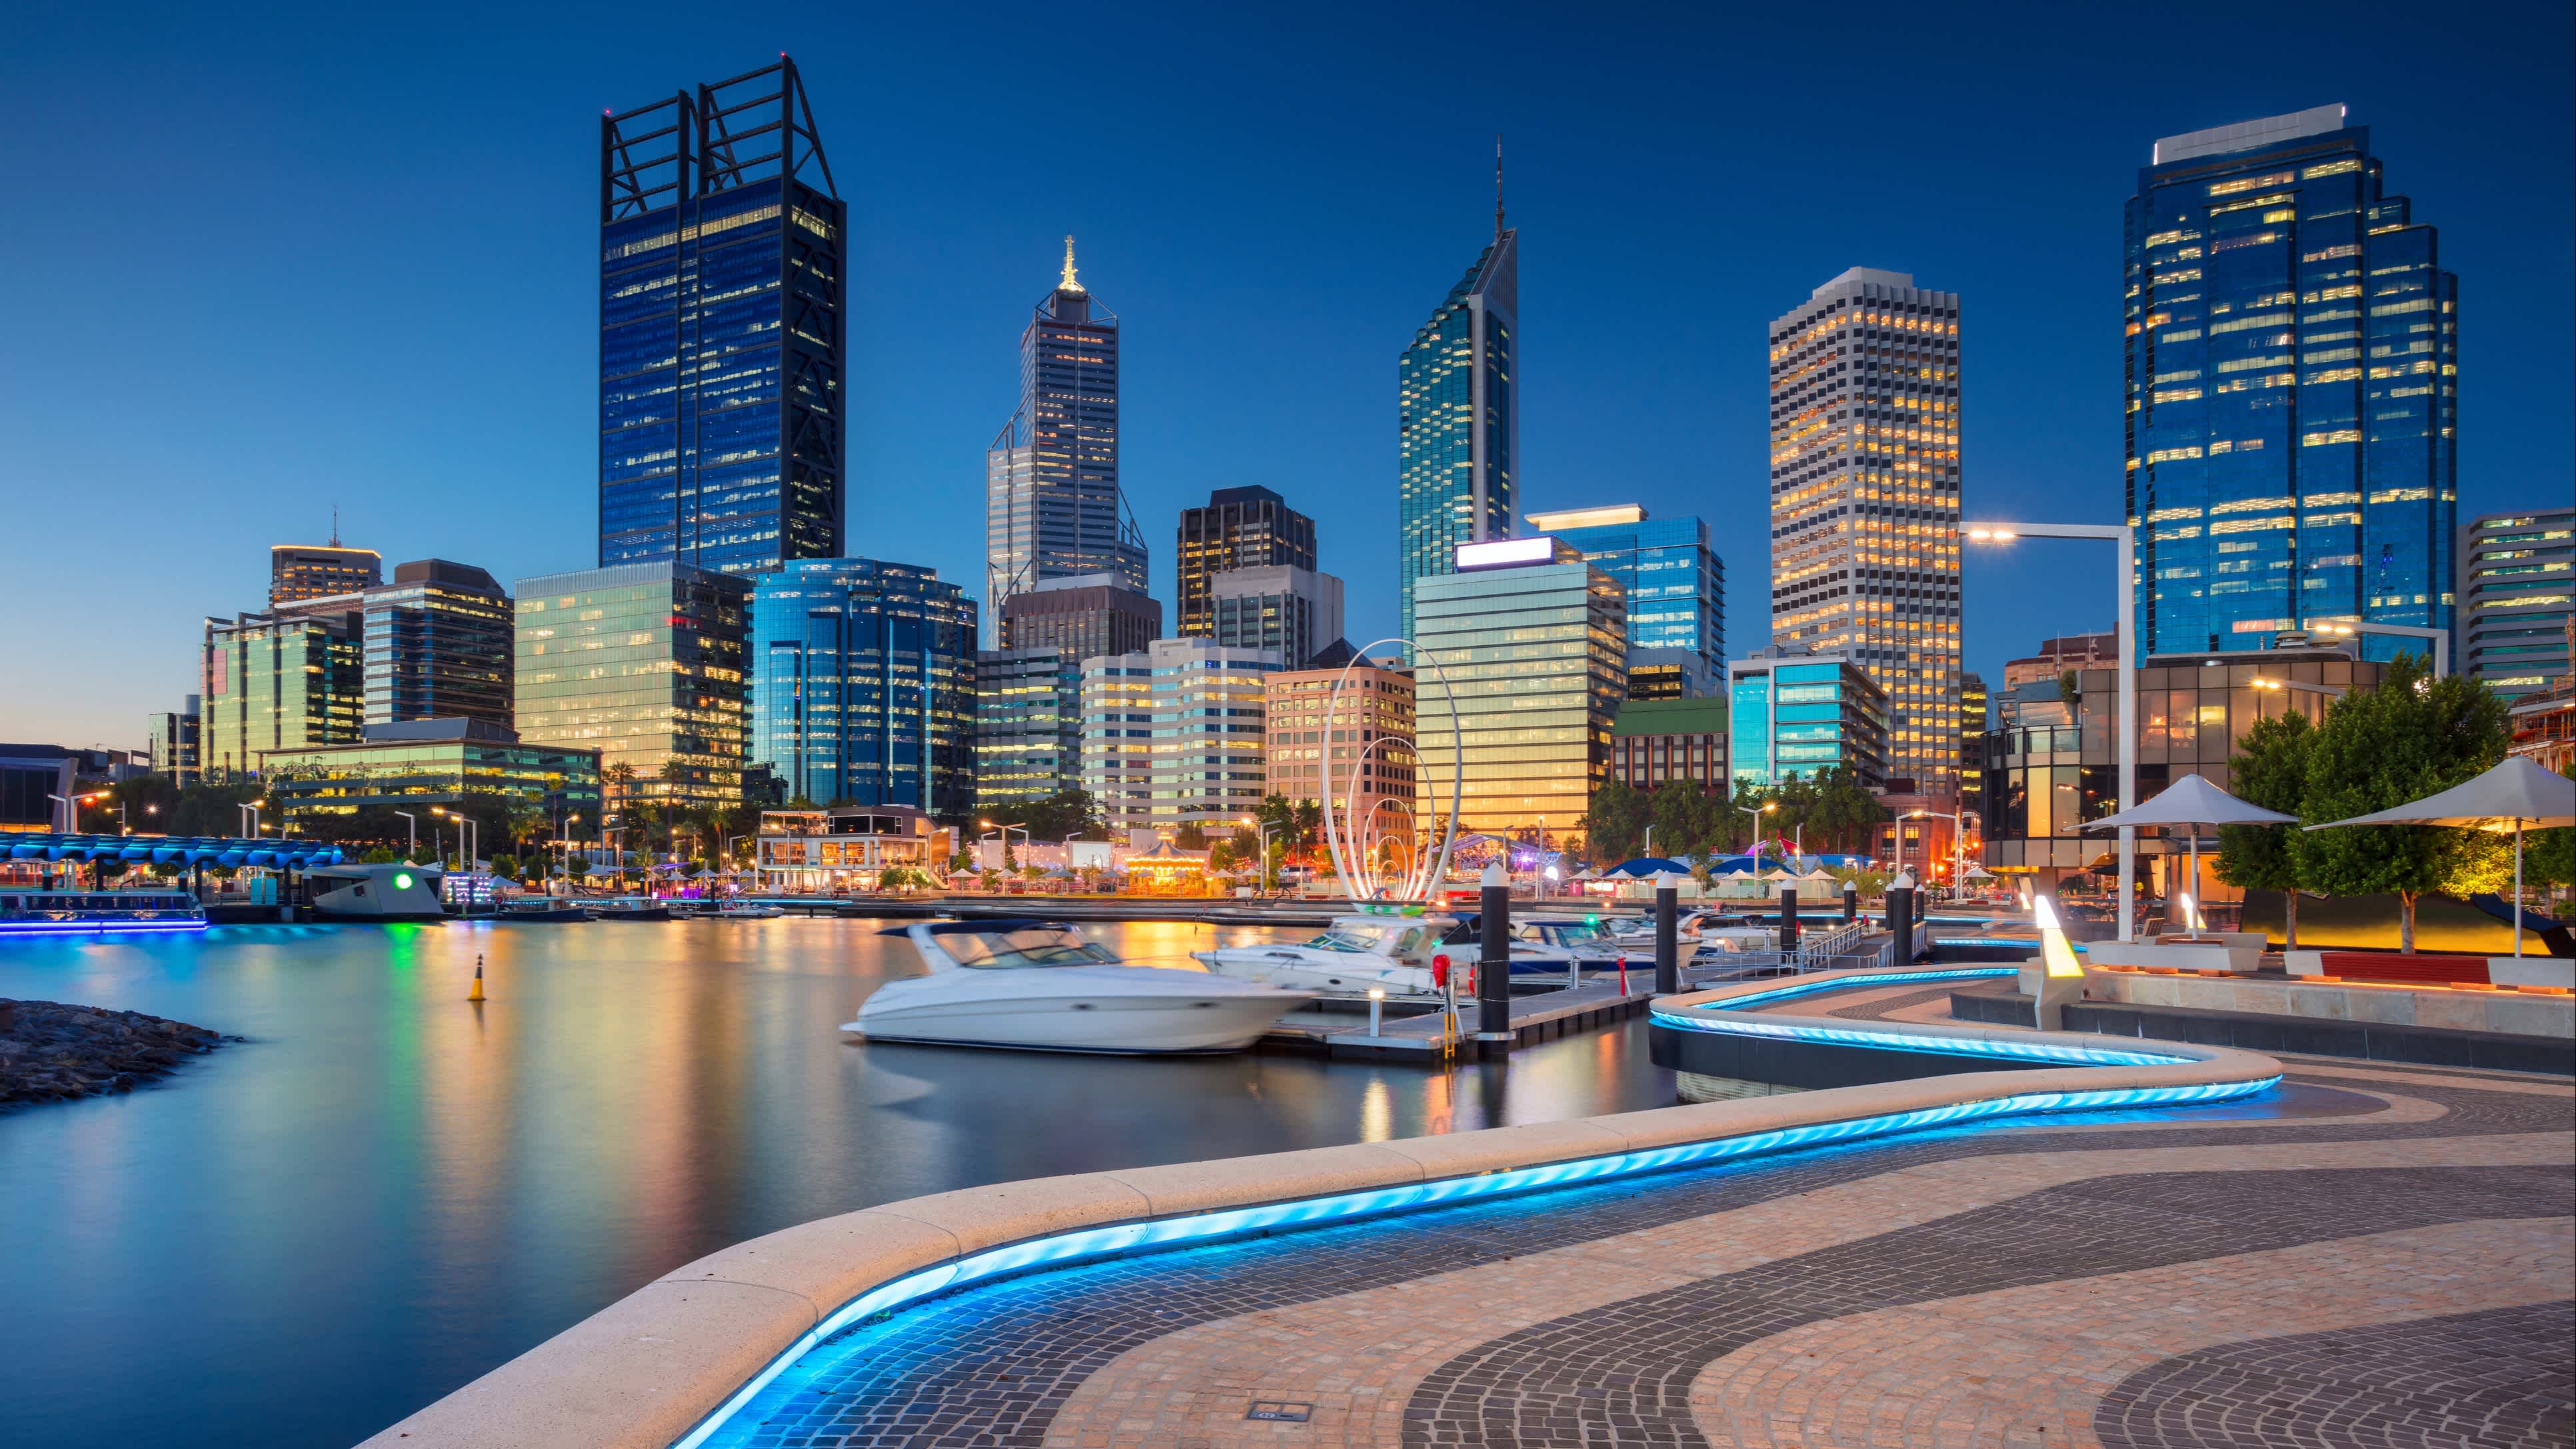 Oceania, Australia, city lights of the Perth skyline and harbor in the late evening. 